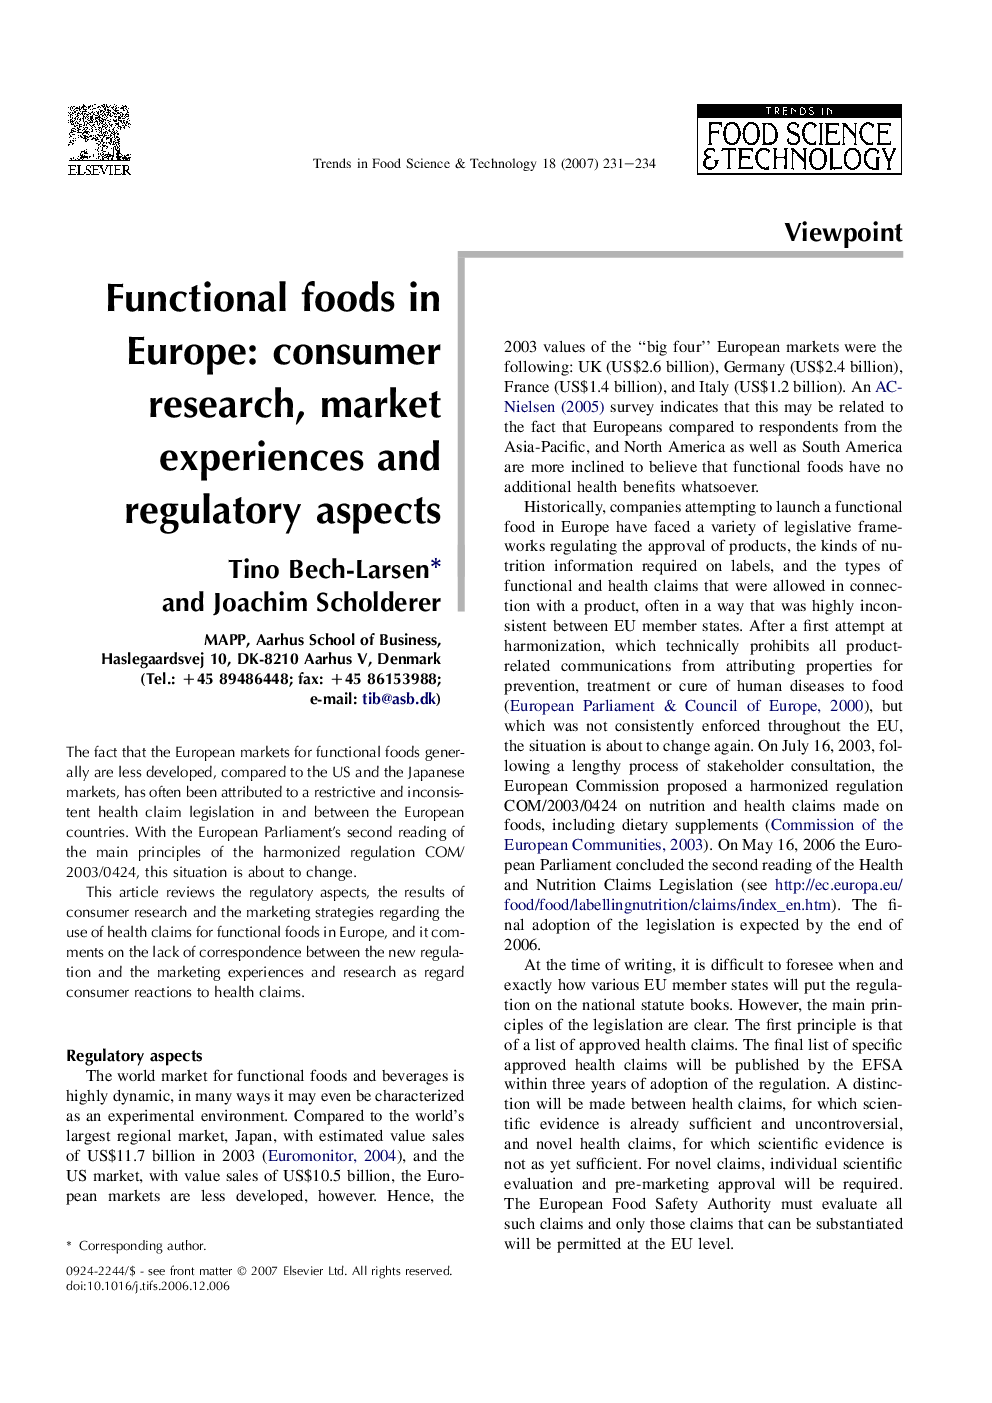 Functional foods in Europe: consumer research, market experiences and regulatory aspects